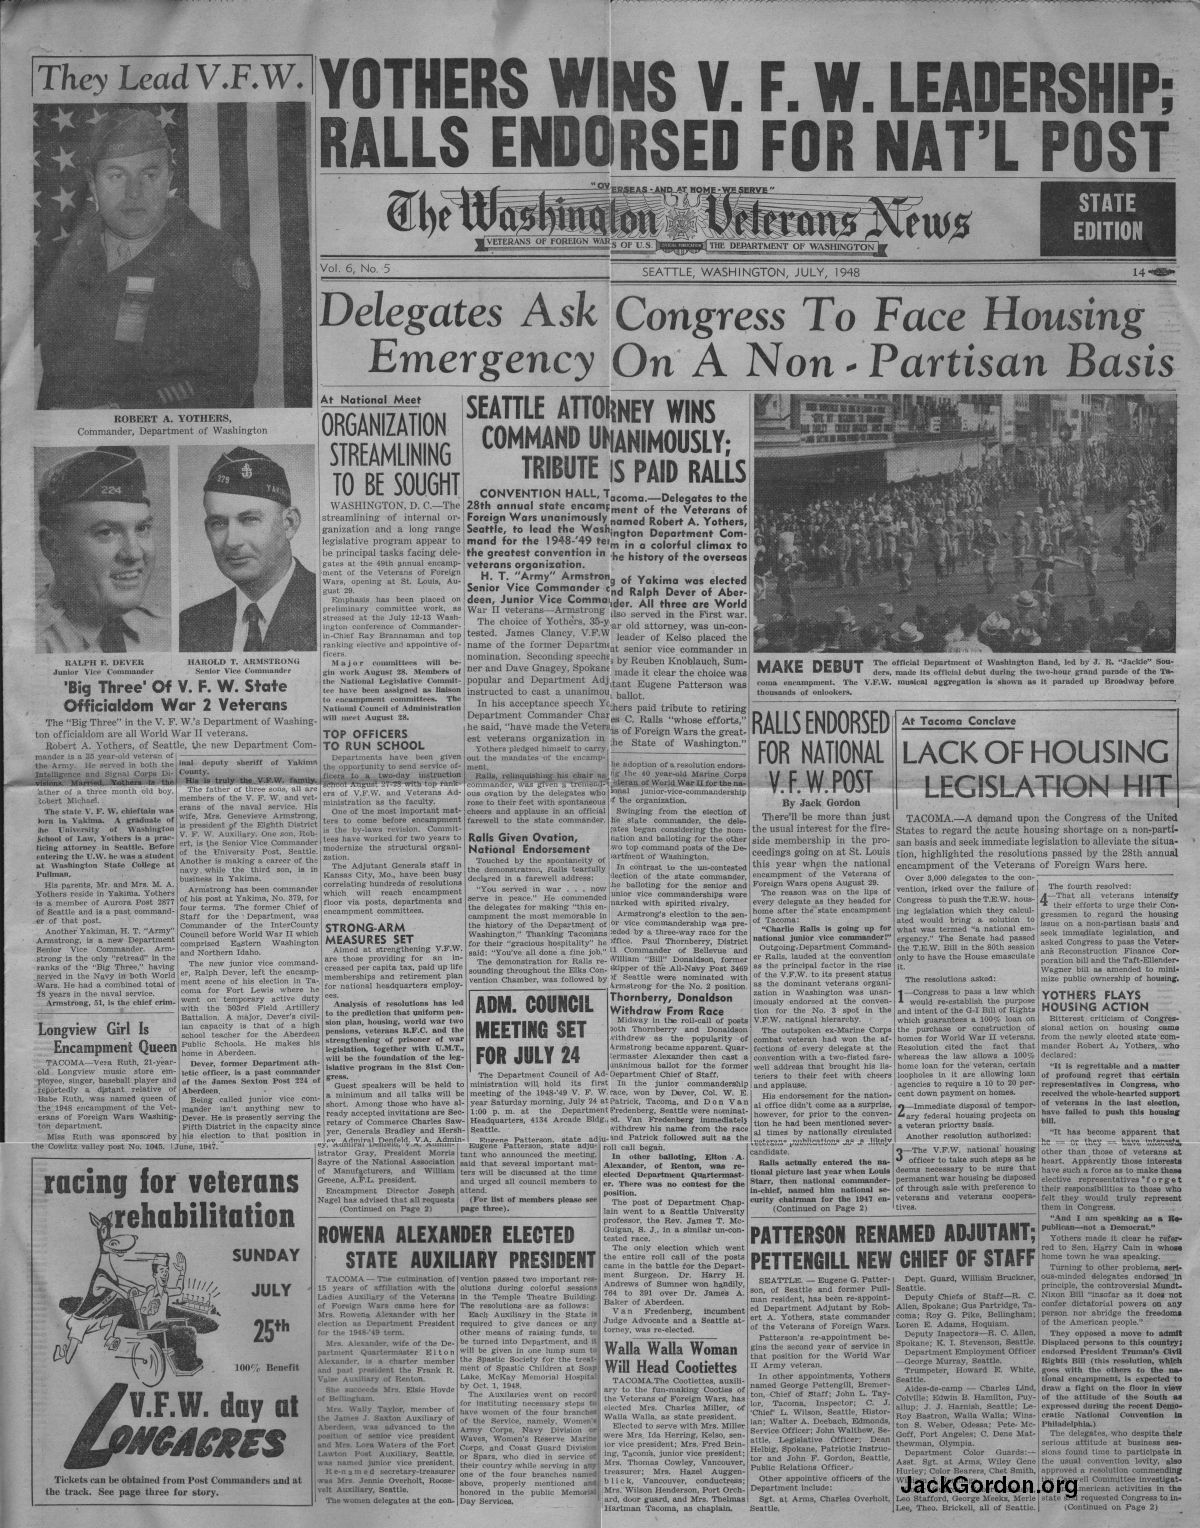 The Washington Veterans News, July, 1948, front cover